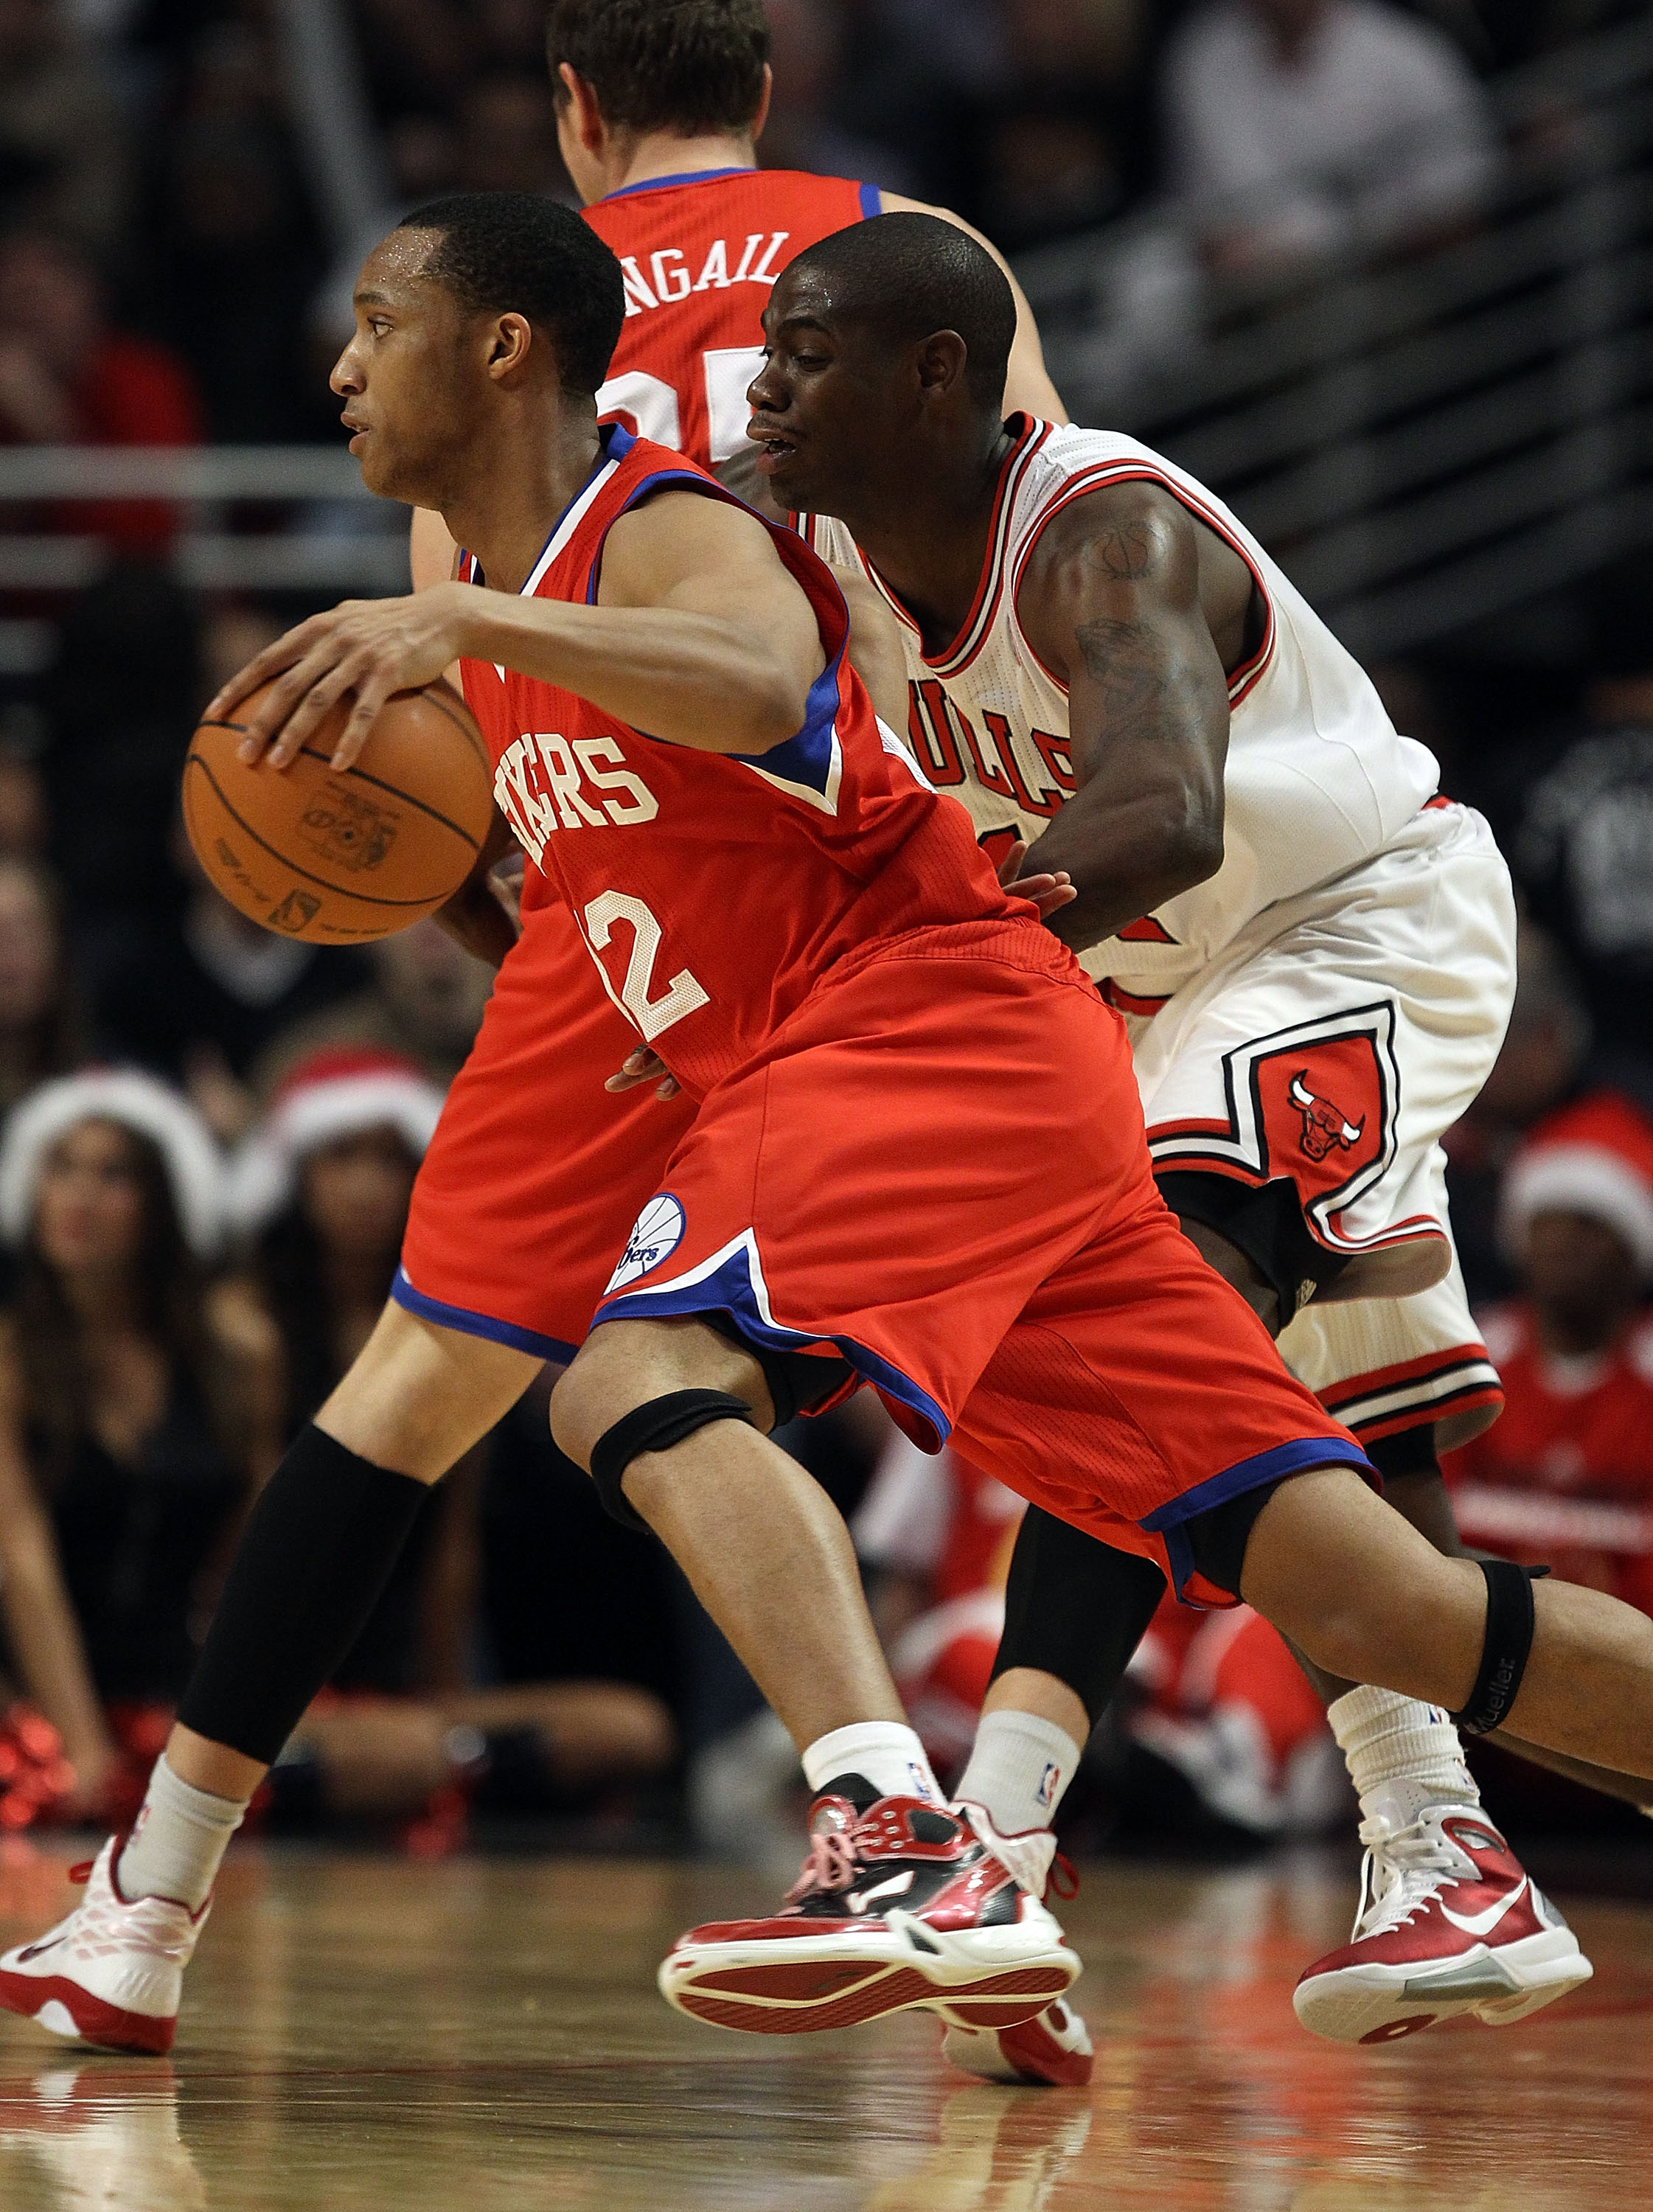 CHICAGO, IL - DECEMBER 21: Evan Turner #12 of the Philadelphia 76ers moves past Ronnie Brewer #11 of the Chicago Bulls at the United Center on December 21, 2010 in Chicago, Illinois. The Bulls defeated the 76ers 121-76. NOTE TO USER: User expressly acknow